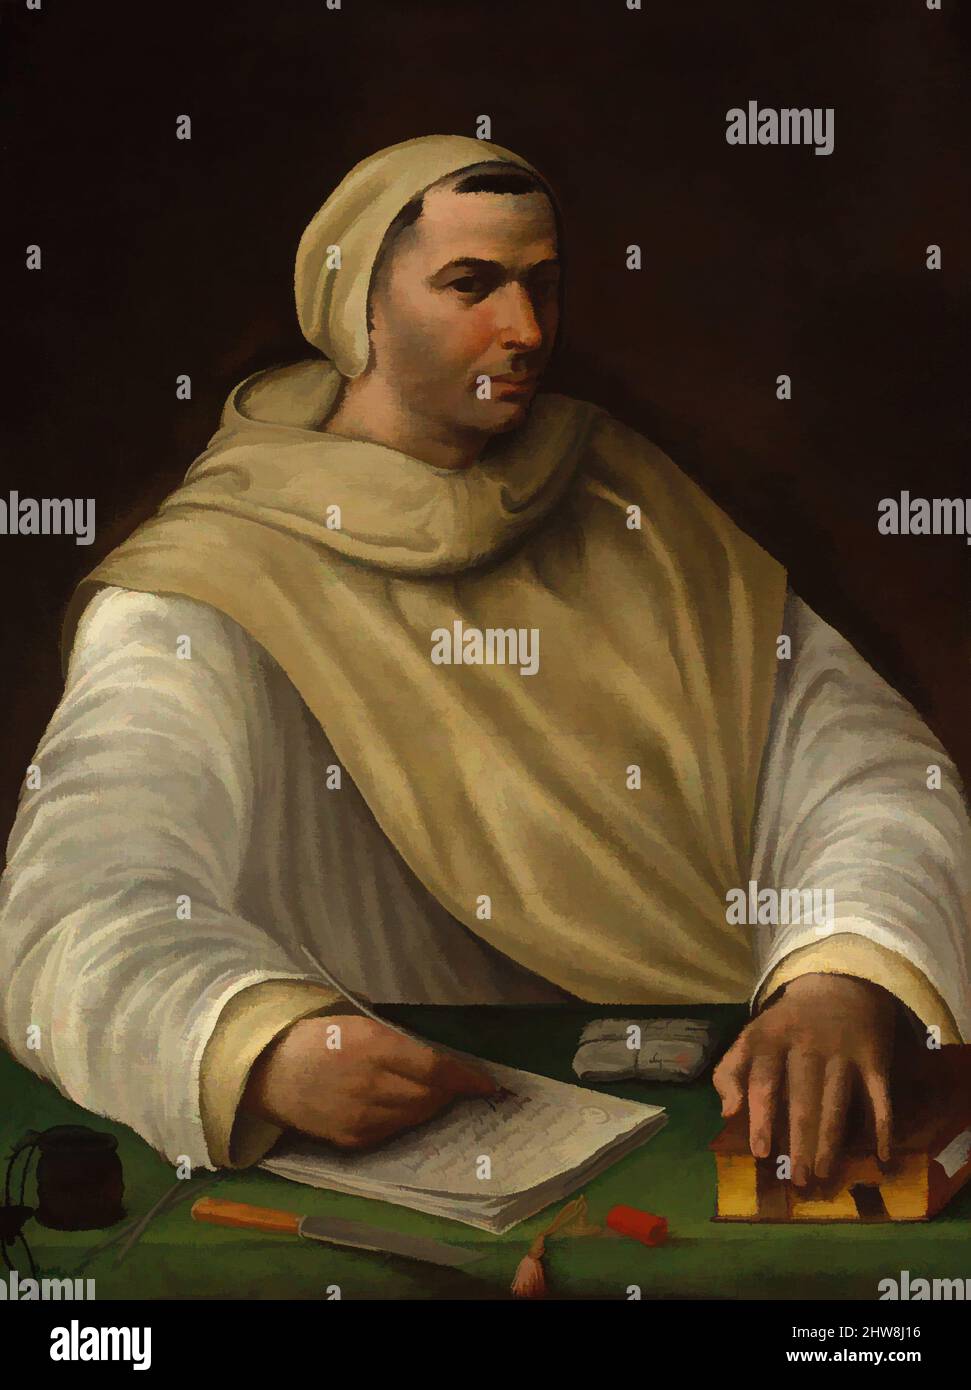 Art inspired by Portrait of an Olivetan Monk, Oil on canvas, 38 1/4 x 28 5/8 in. (97.2 x 72.7 cm), Paintings, Attributed to Baldassare Tommaso Peruzzi (Italian, Ancaiano 1481–1536 Rome), The sitter in this portrait is an Olivetan monk, a branch of the Benedictines. He is surrounded by, Classic works modernized by Artotop with a splash of modernity. Shapes, color and value, eye-catching visual impact on art. Emotions through freedom of artworks in a contemporary way. A timeless message pursuing a wildly creative new direction. Artists turning to the digital medium and creating the Artotop NFT Stock Photo